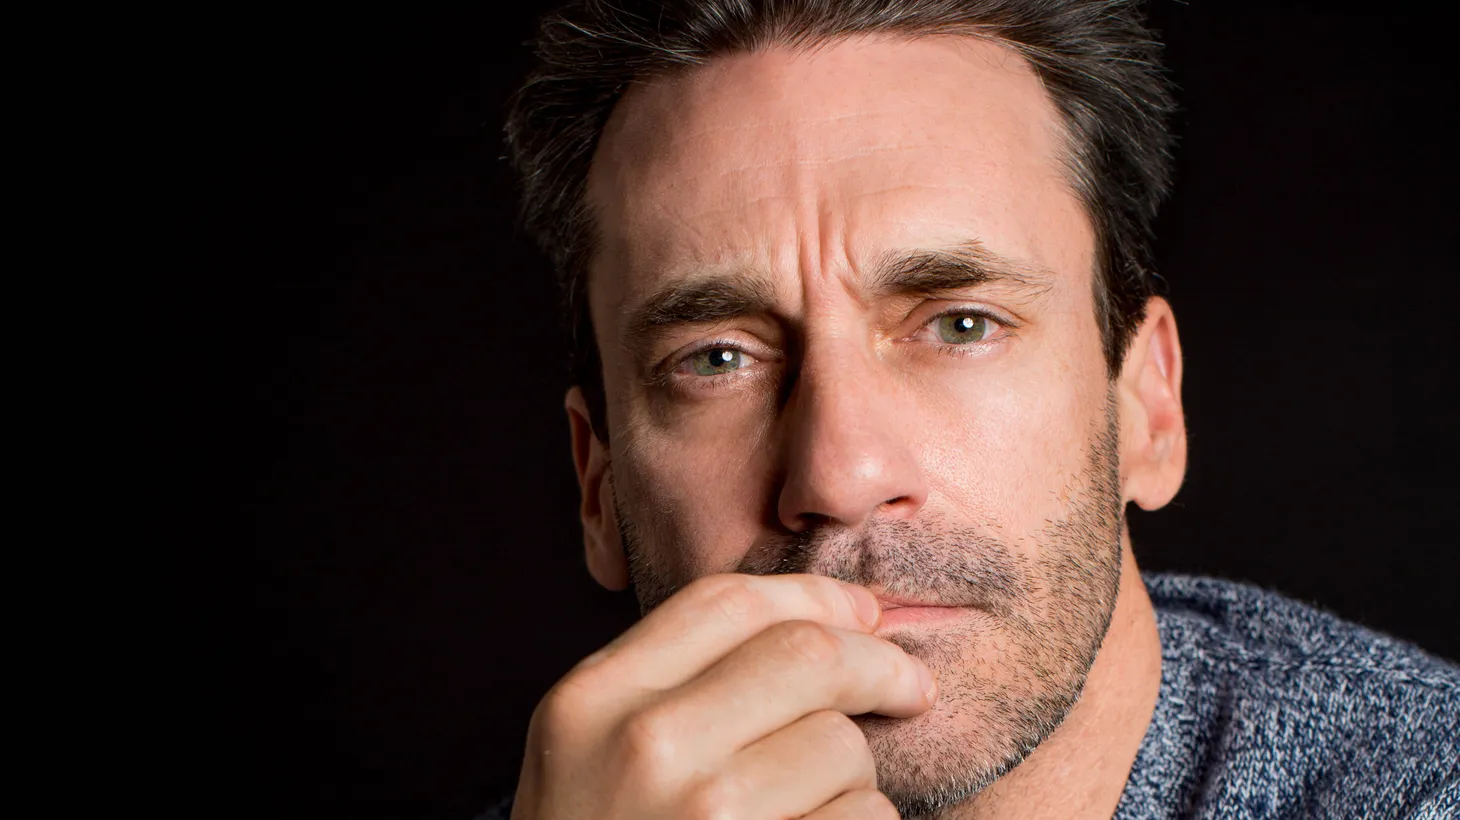 “I think that having a good sense of imagination and wonder about the absurdity of life, which are things that John Irving gets into, is a pretty good prerequisite for wanting to be an actor,” says actor Jon Hamm.